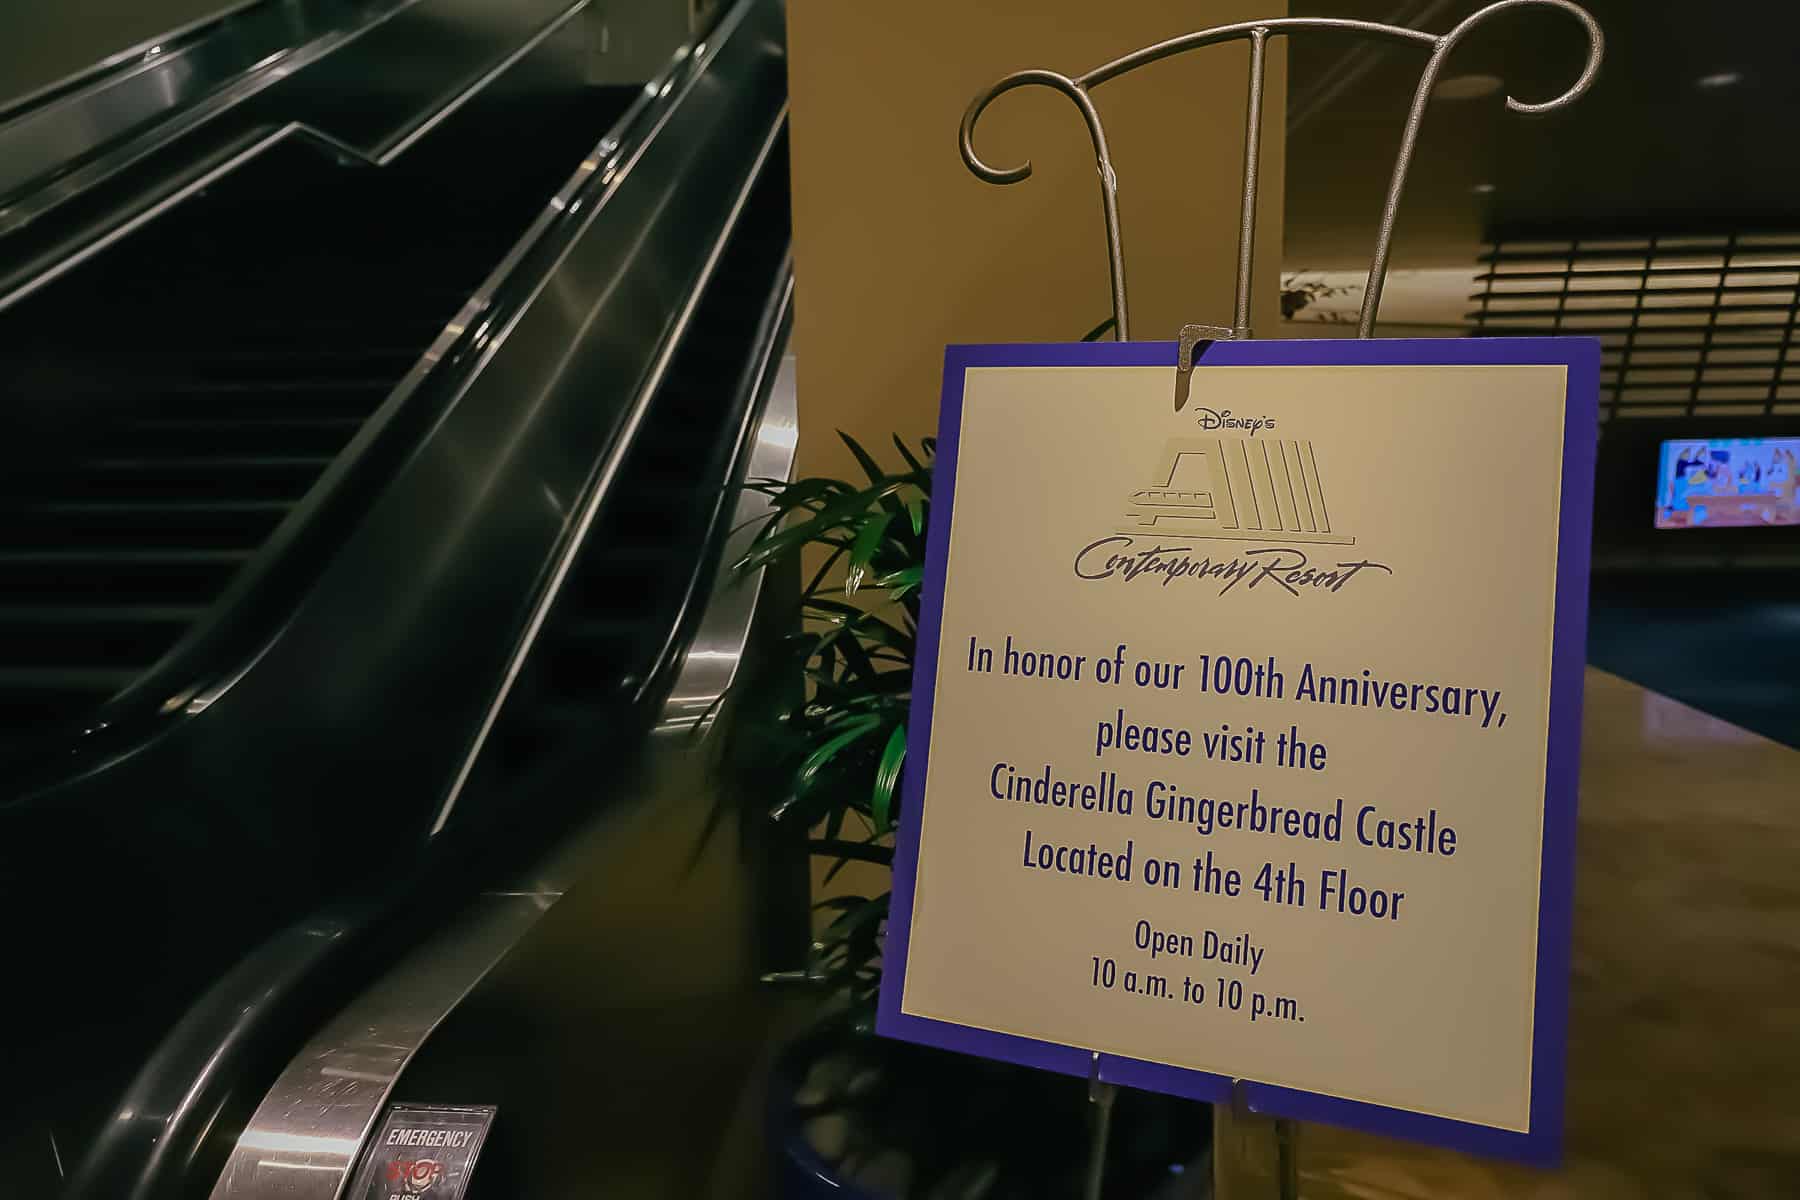 Directional that says, "In honor of our 100th anniversary please visit the Cinderella Gingerbread Castle located on the 4th floor. Open Daily from 10:00 a.m. to 10:00 p.m. 